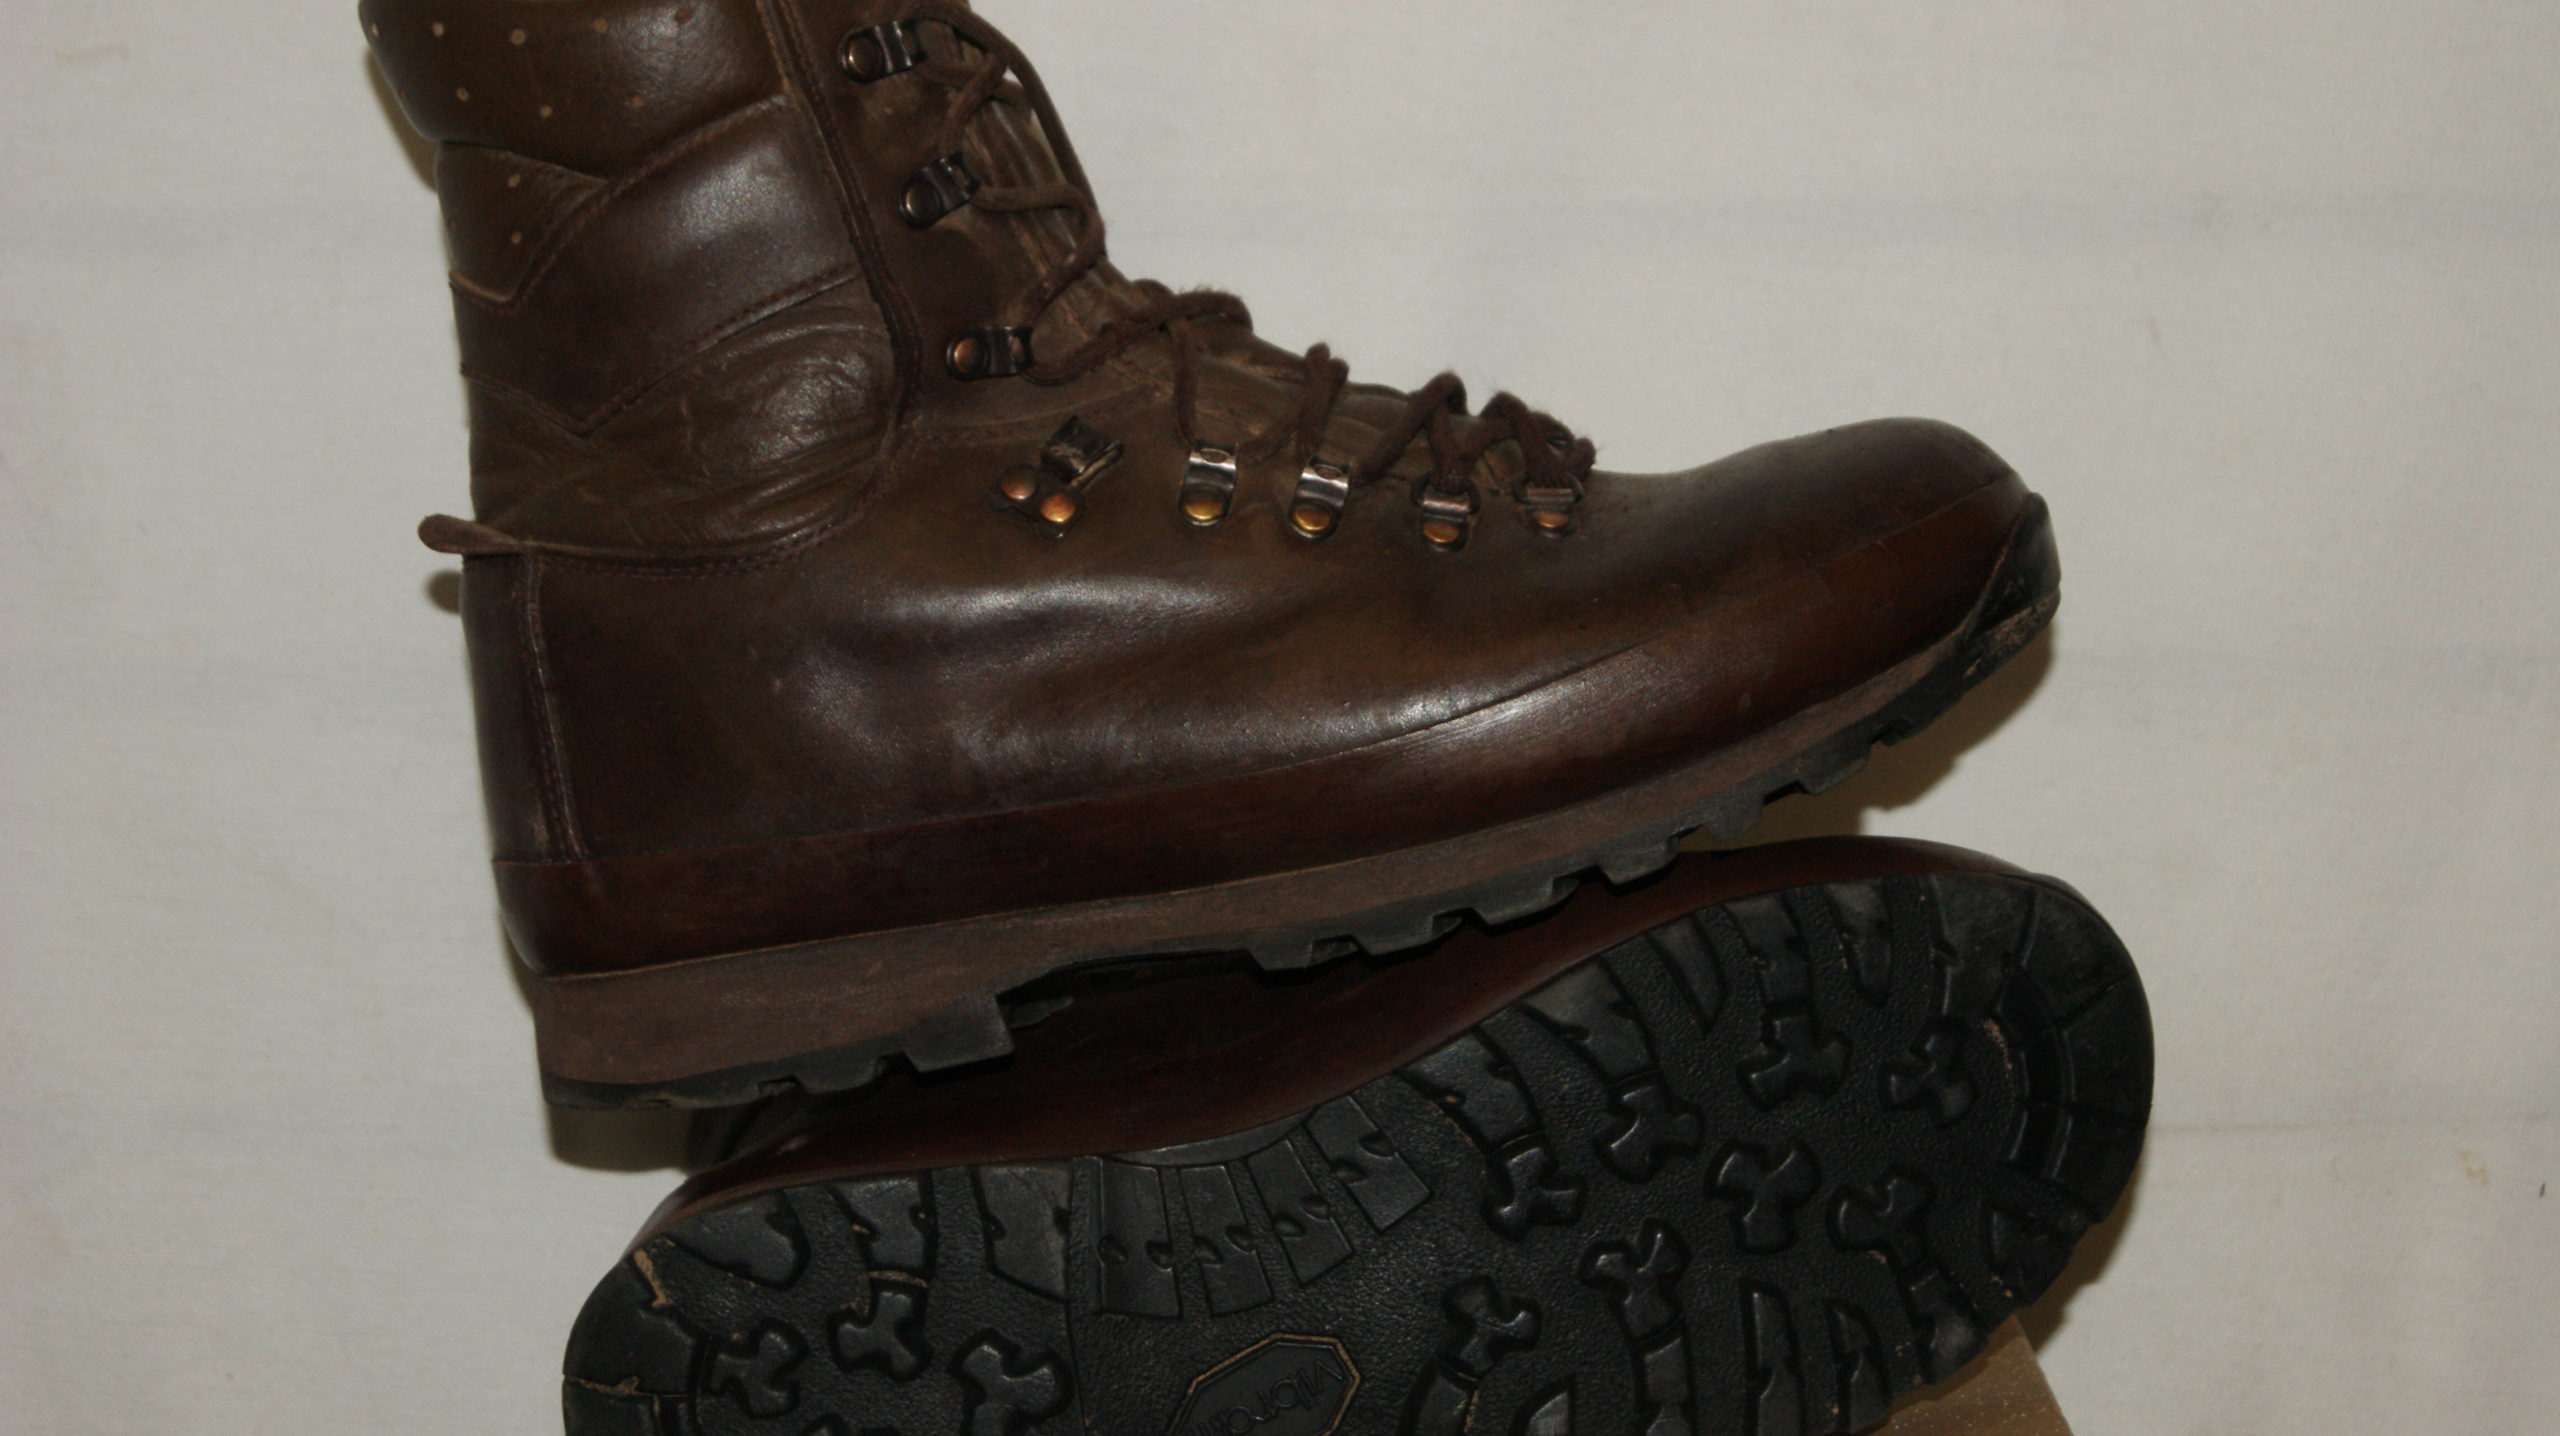 British Ex Army Gore Tex Altberg Boots Brown Leather - Army Shop